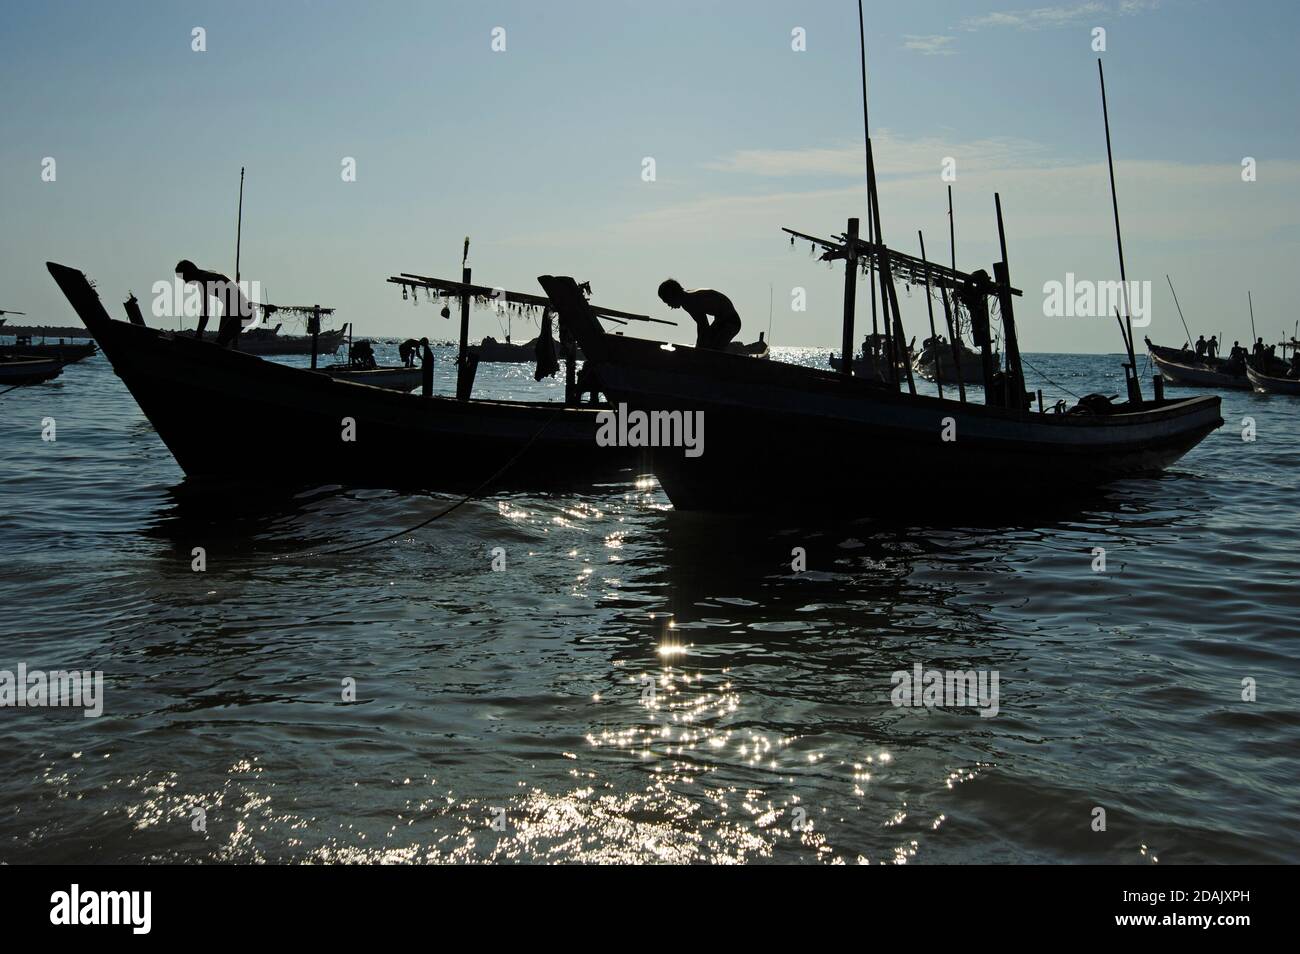 Silhouettes of Burmese fishermen ready their fishing boats for a nights fishing as the sun goes down on Ngapali beach Myanmar Stock Photo